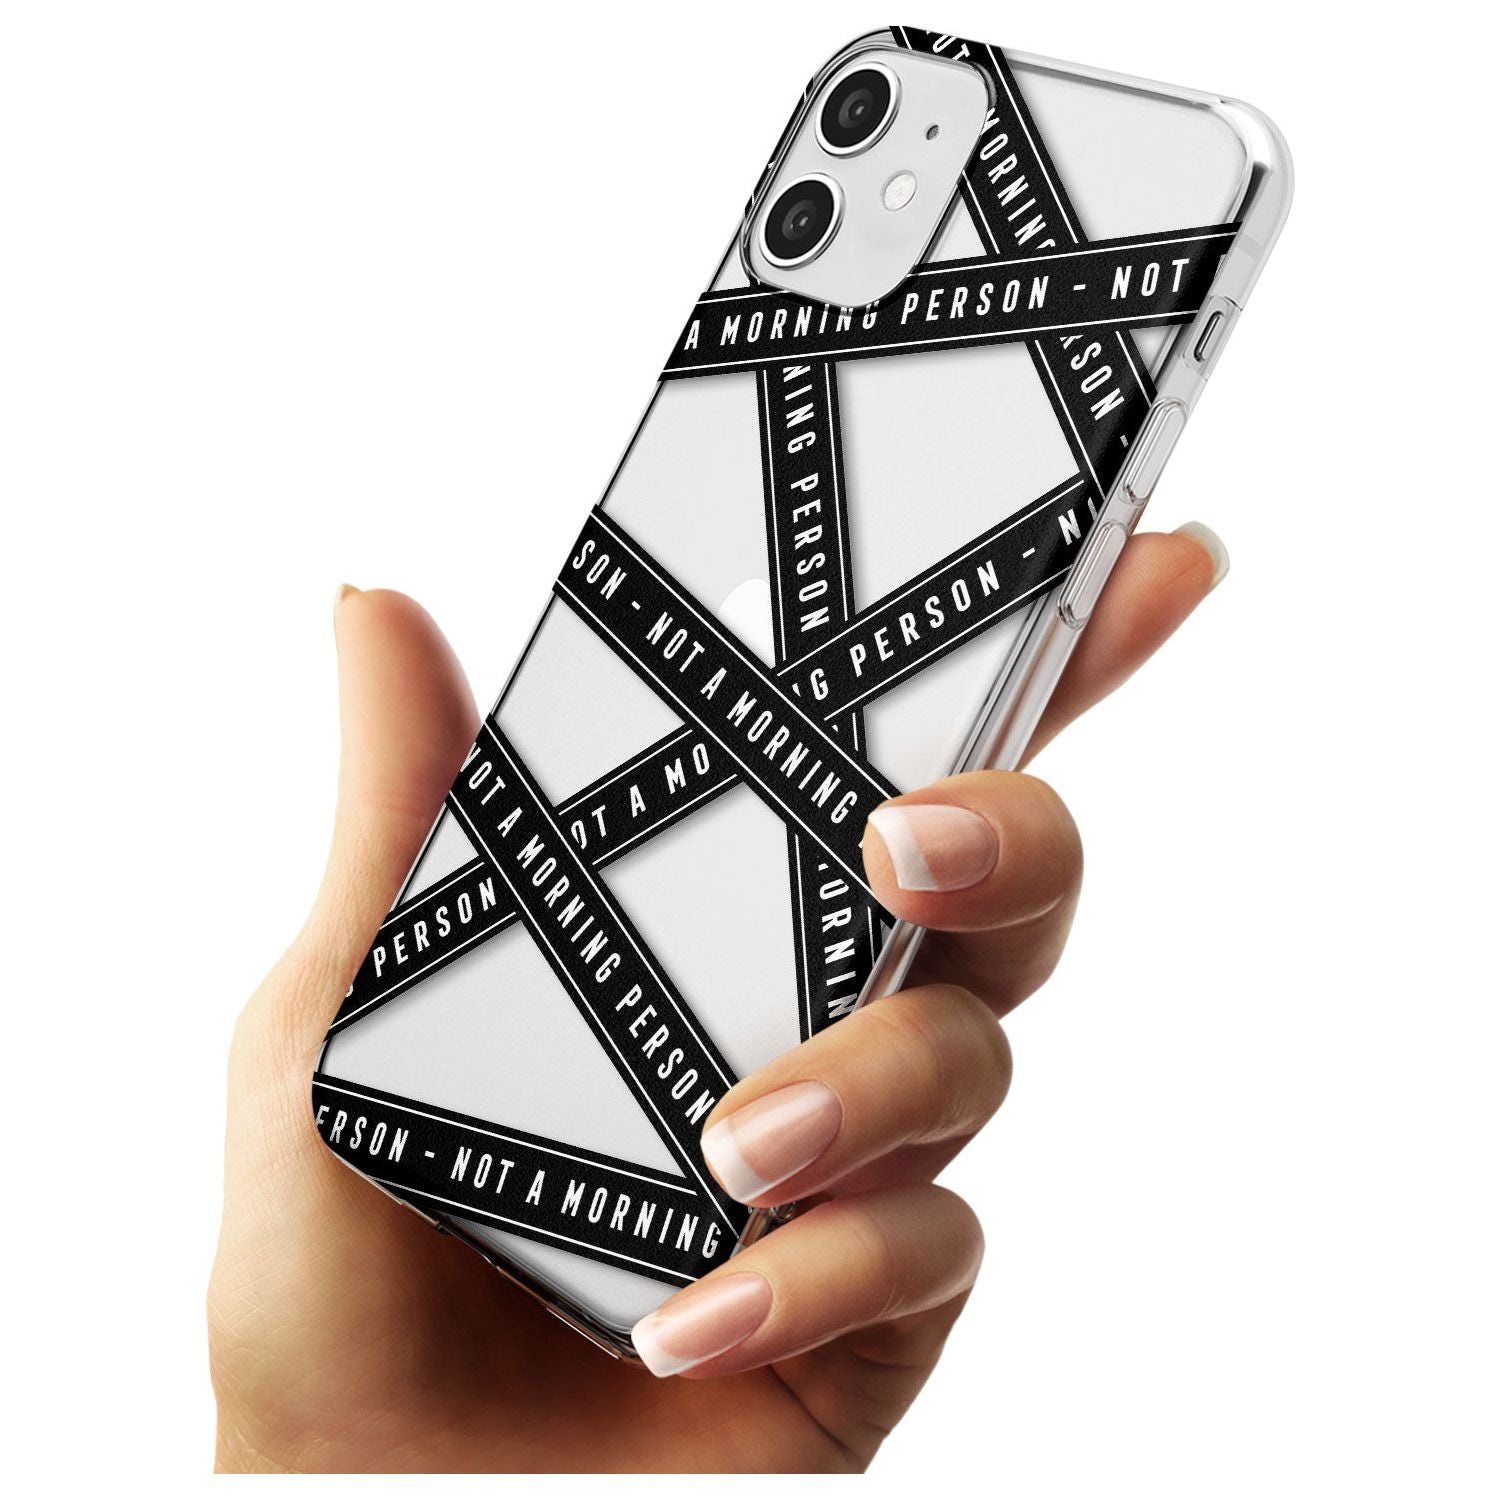 Caution Tape (Clear) Not a Morning Person Slim TPU Phone Case for iPhone 11